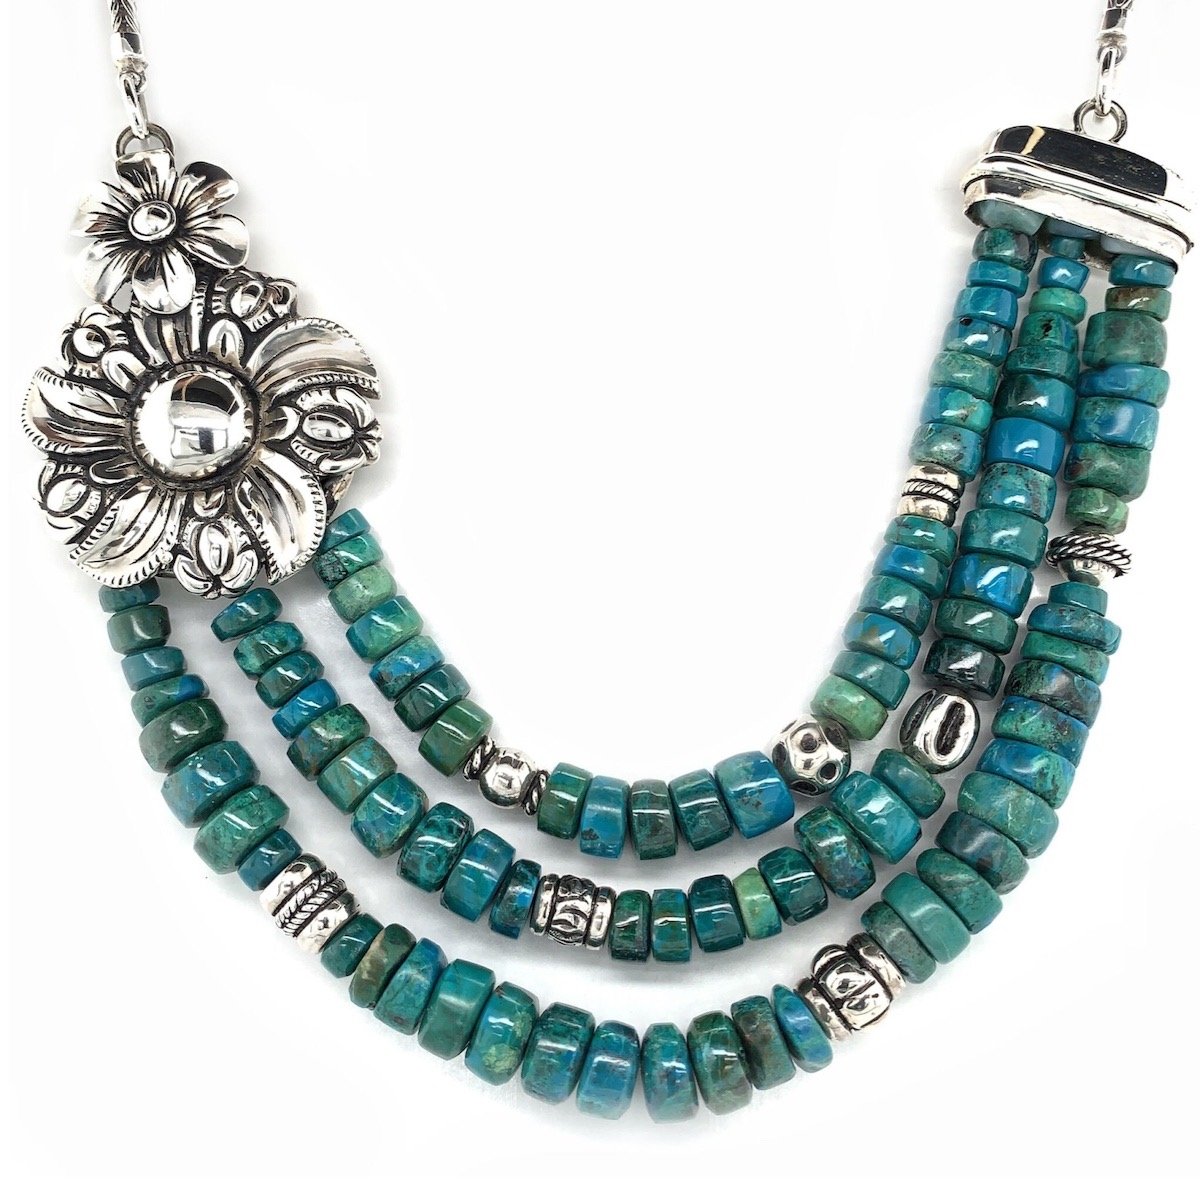 Chrysocolla Beads and Coralina Flower Sterling Silver Necklace - Qinti - The Peruvian Shop